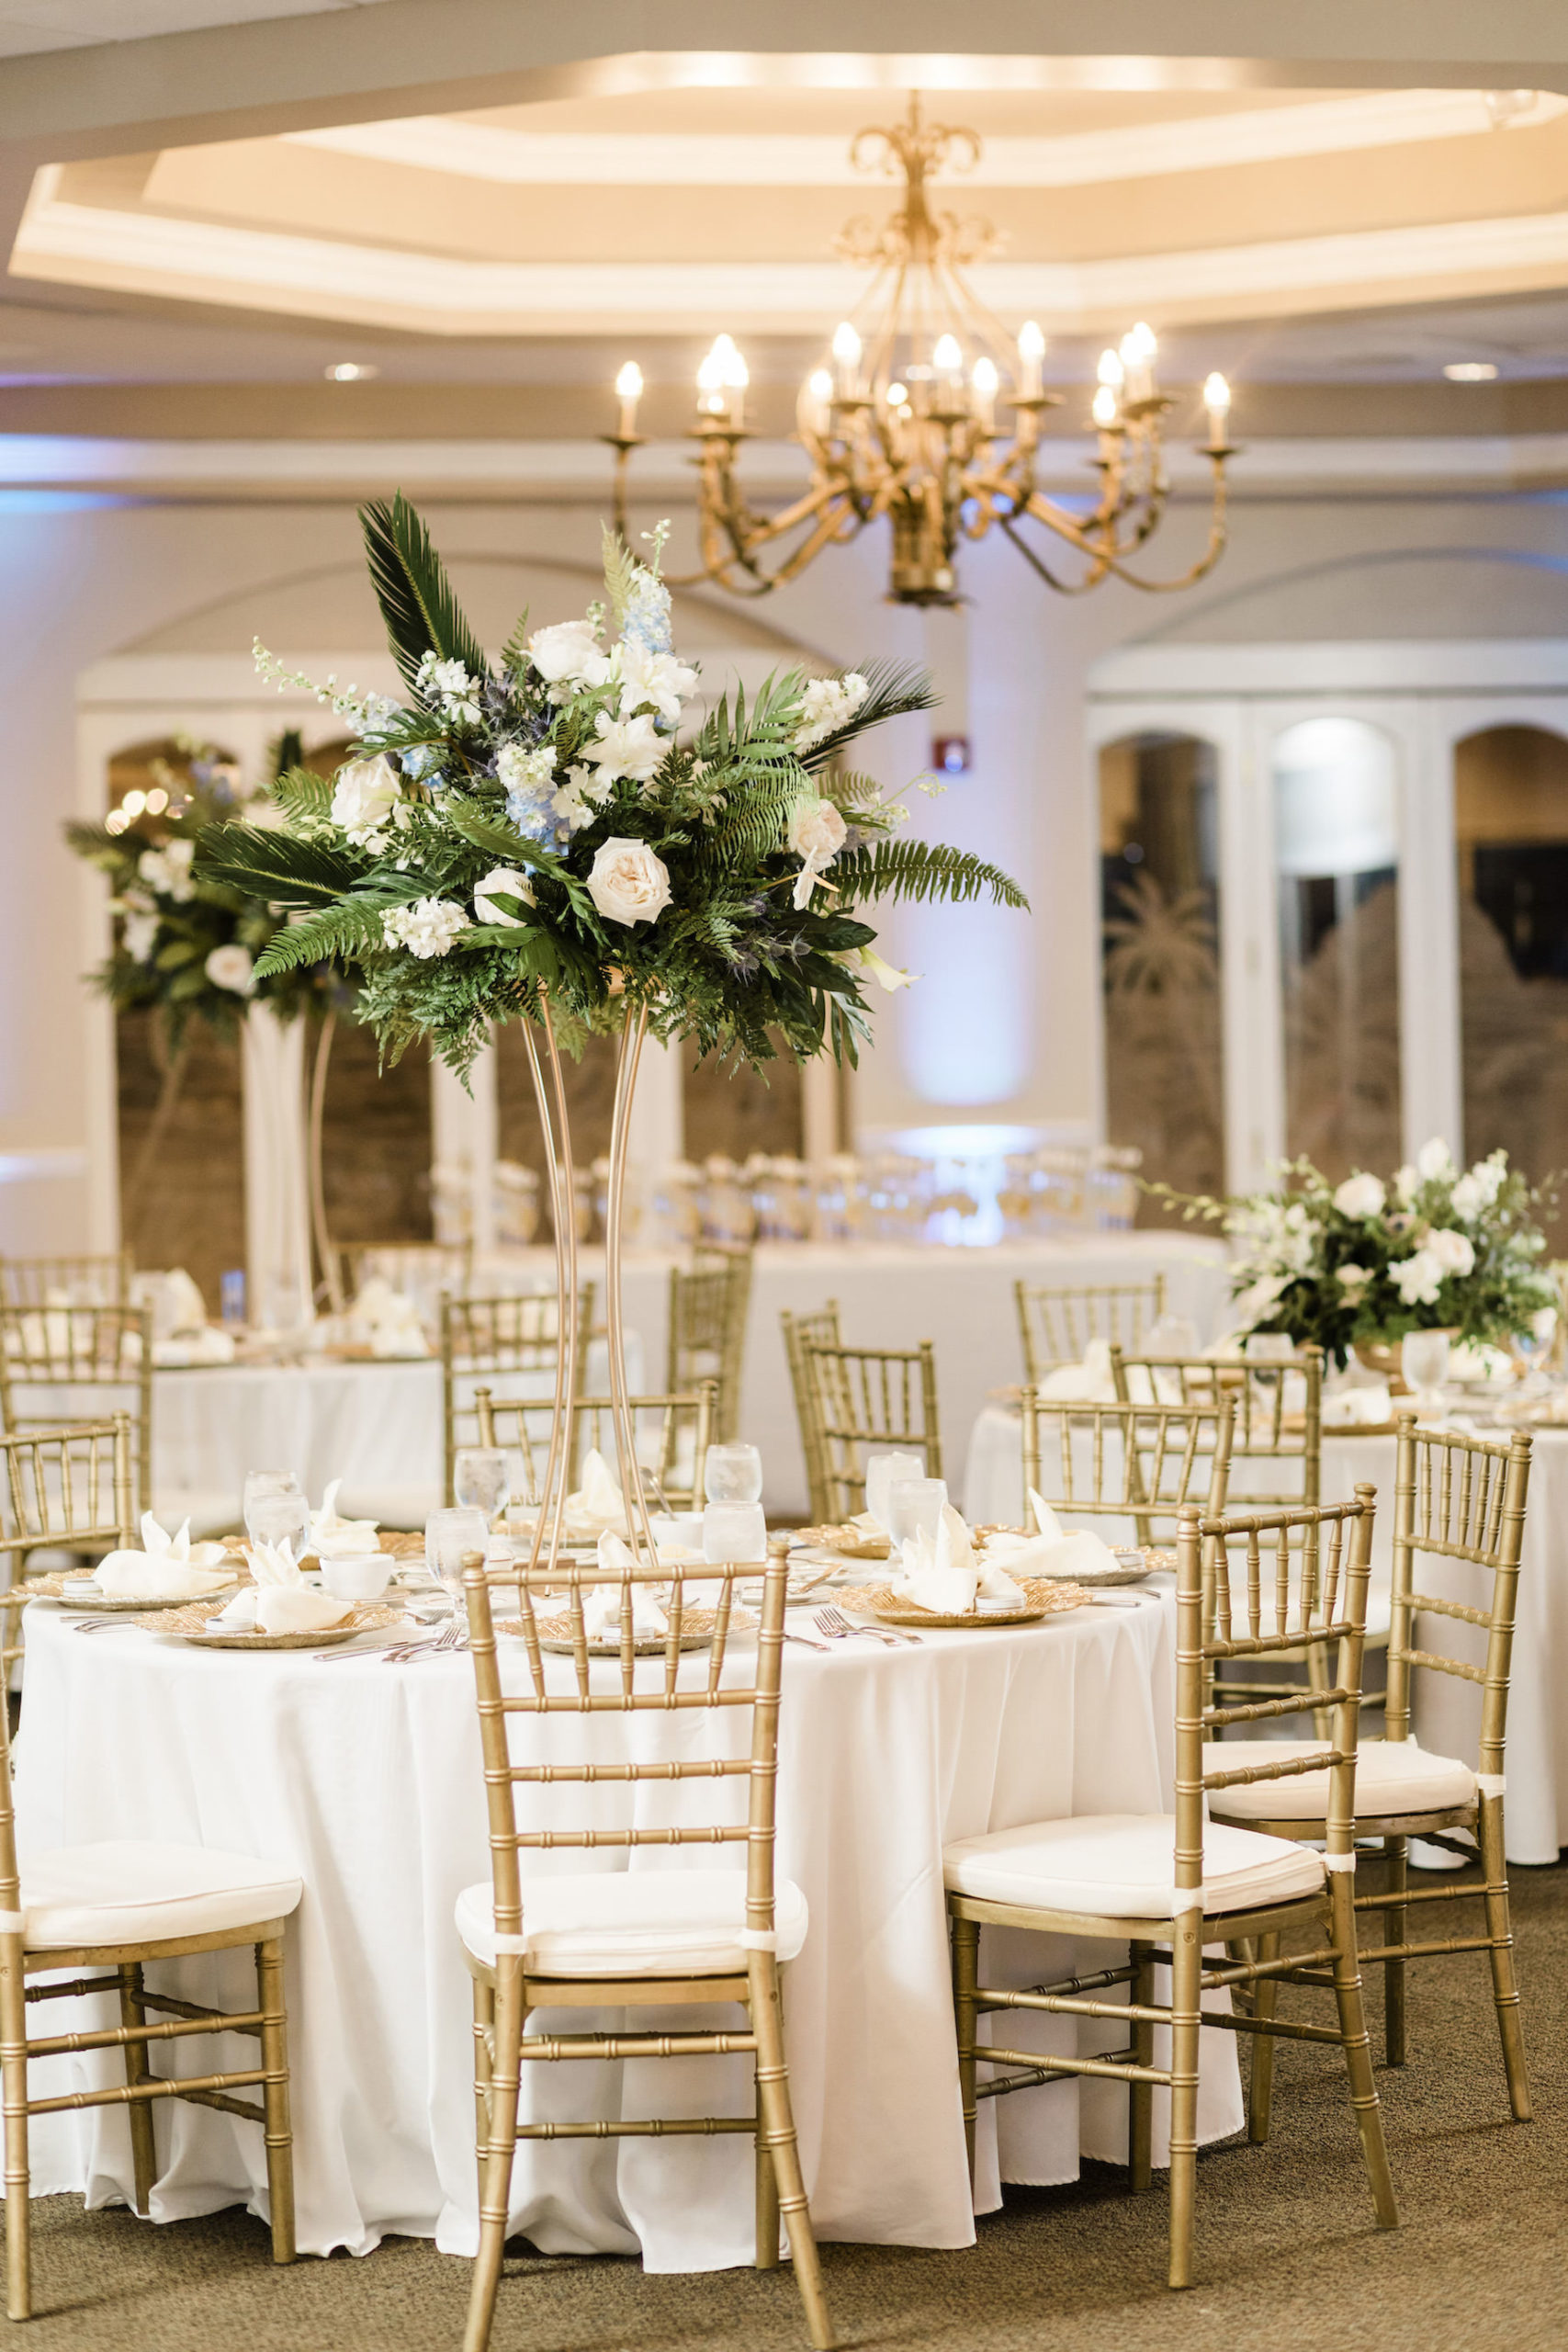 St. Pete Wedding Venue Isla Del Sol | Indoor Ballroom Reception with Blue Uplighting and Gold Chiavari Chairs and Tall Tropical Centerpieces